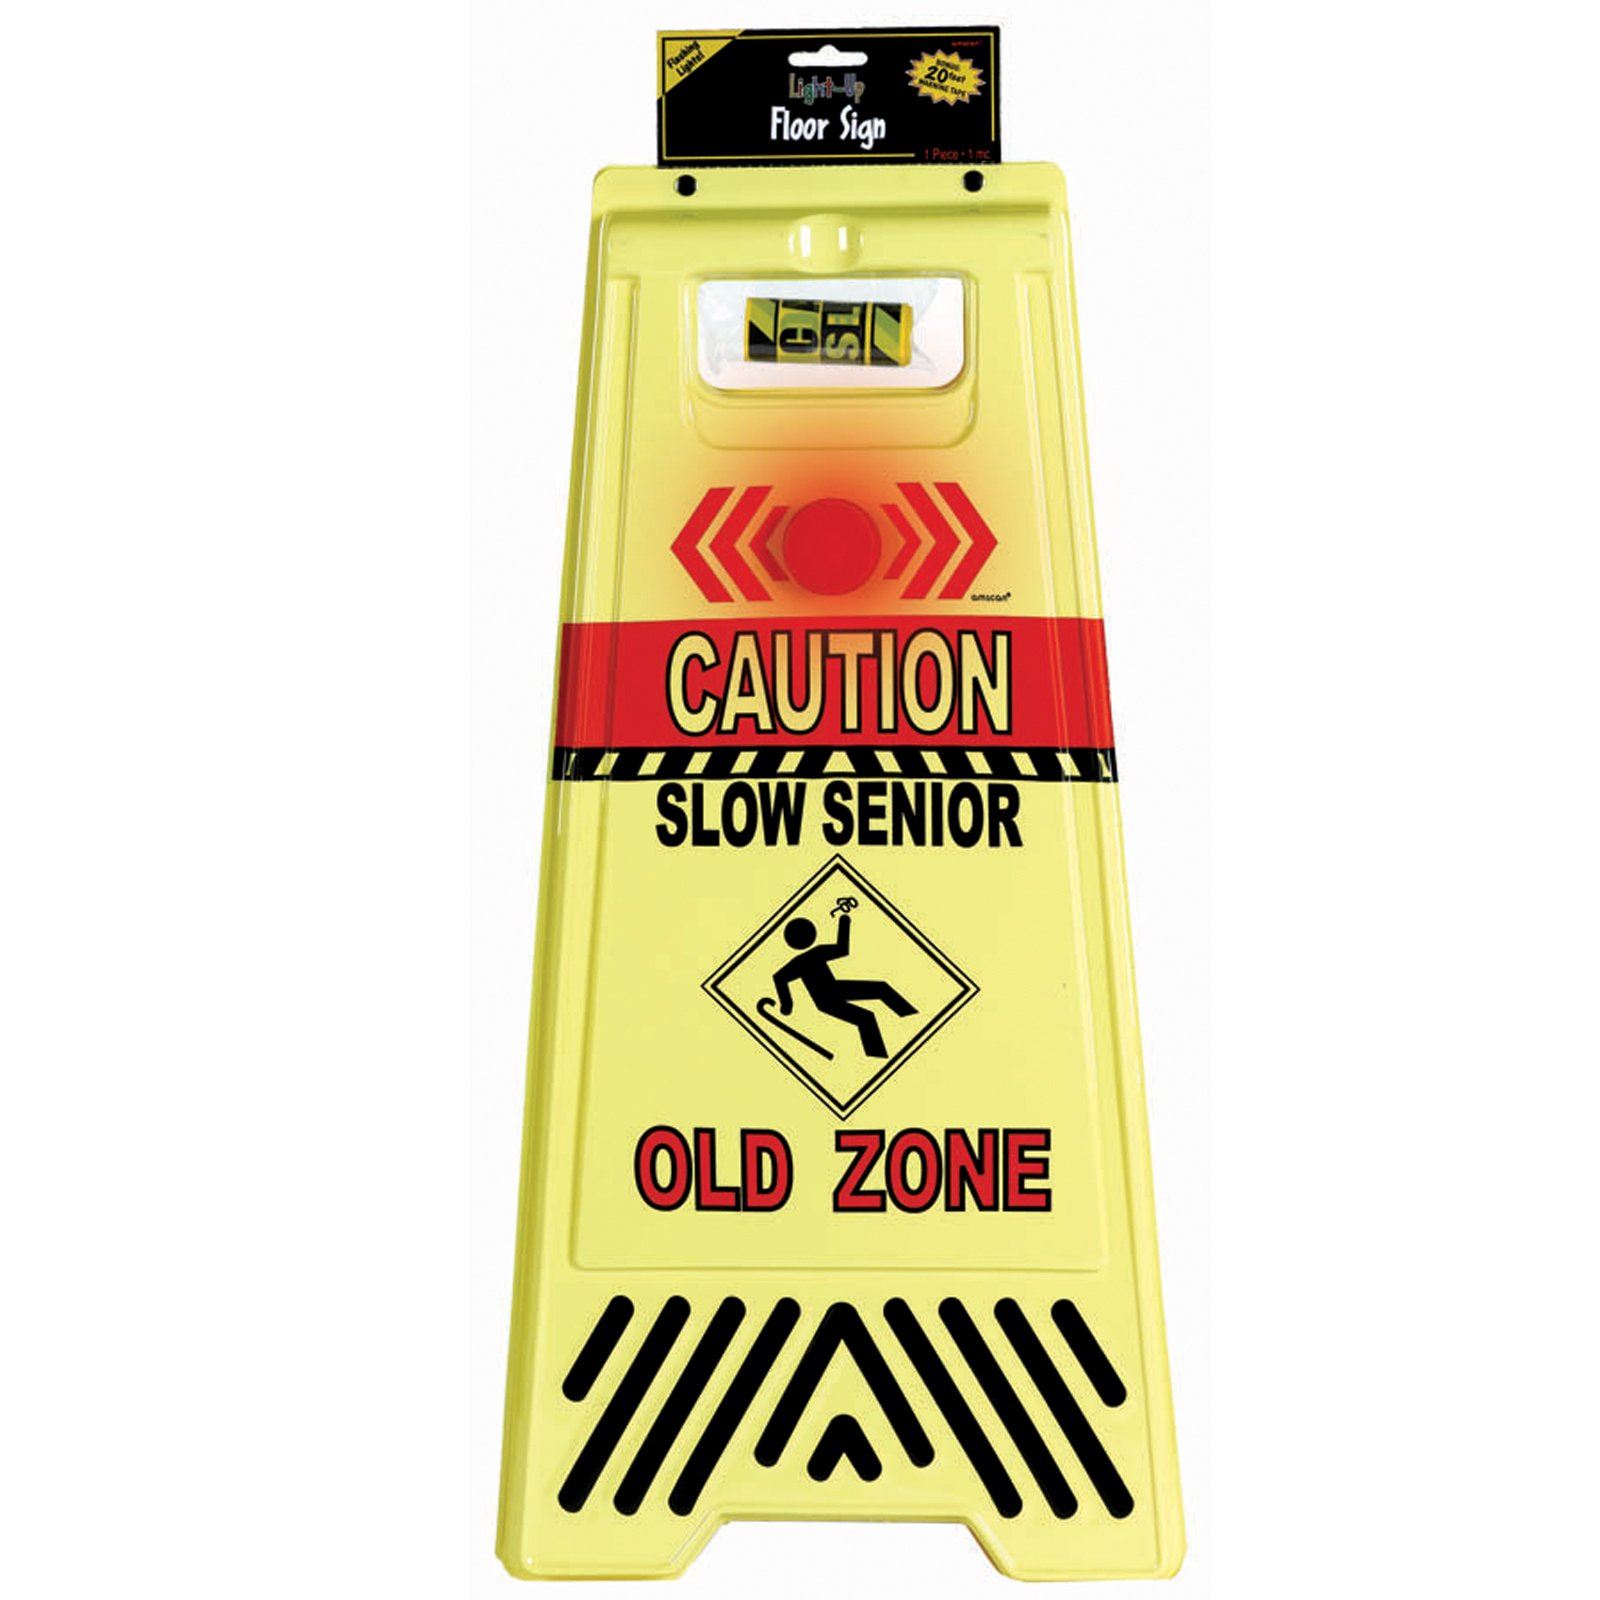 Over the Hill Old Zone Floor Sign - Click Image to Close